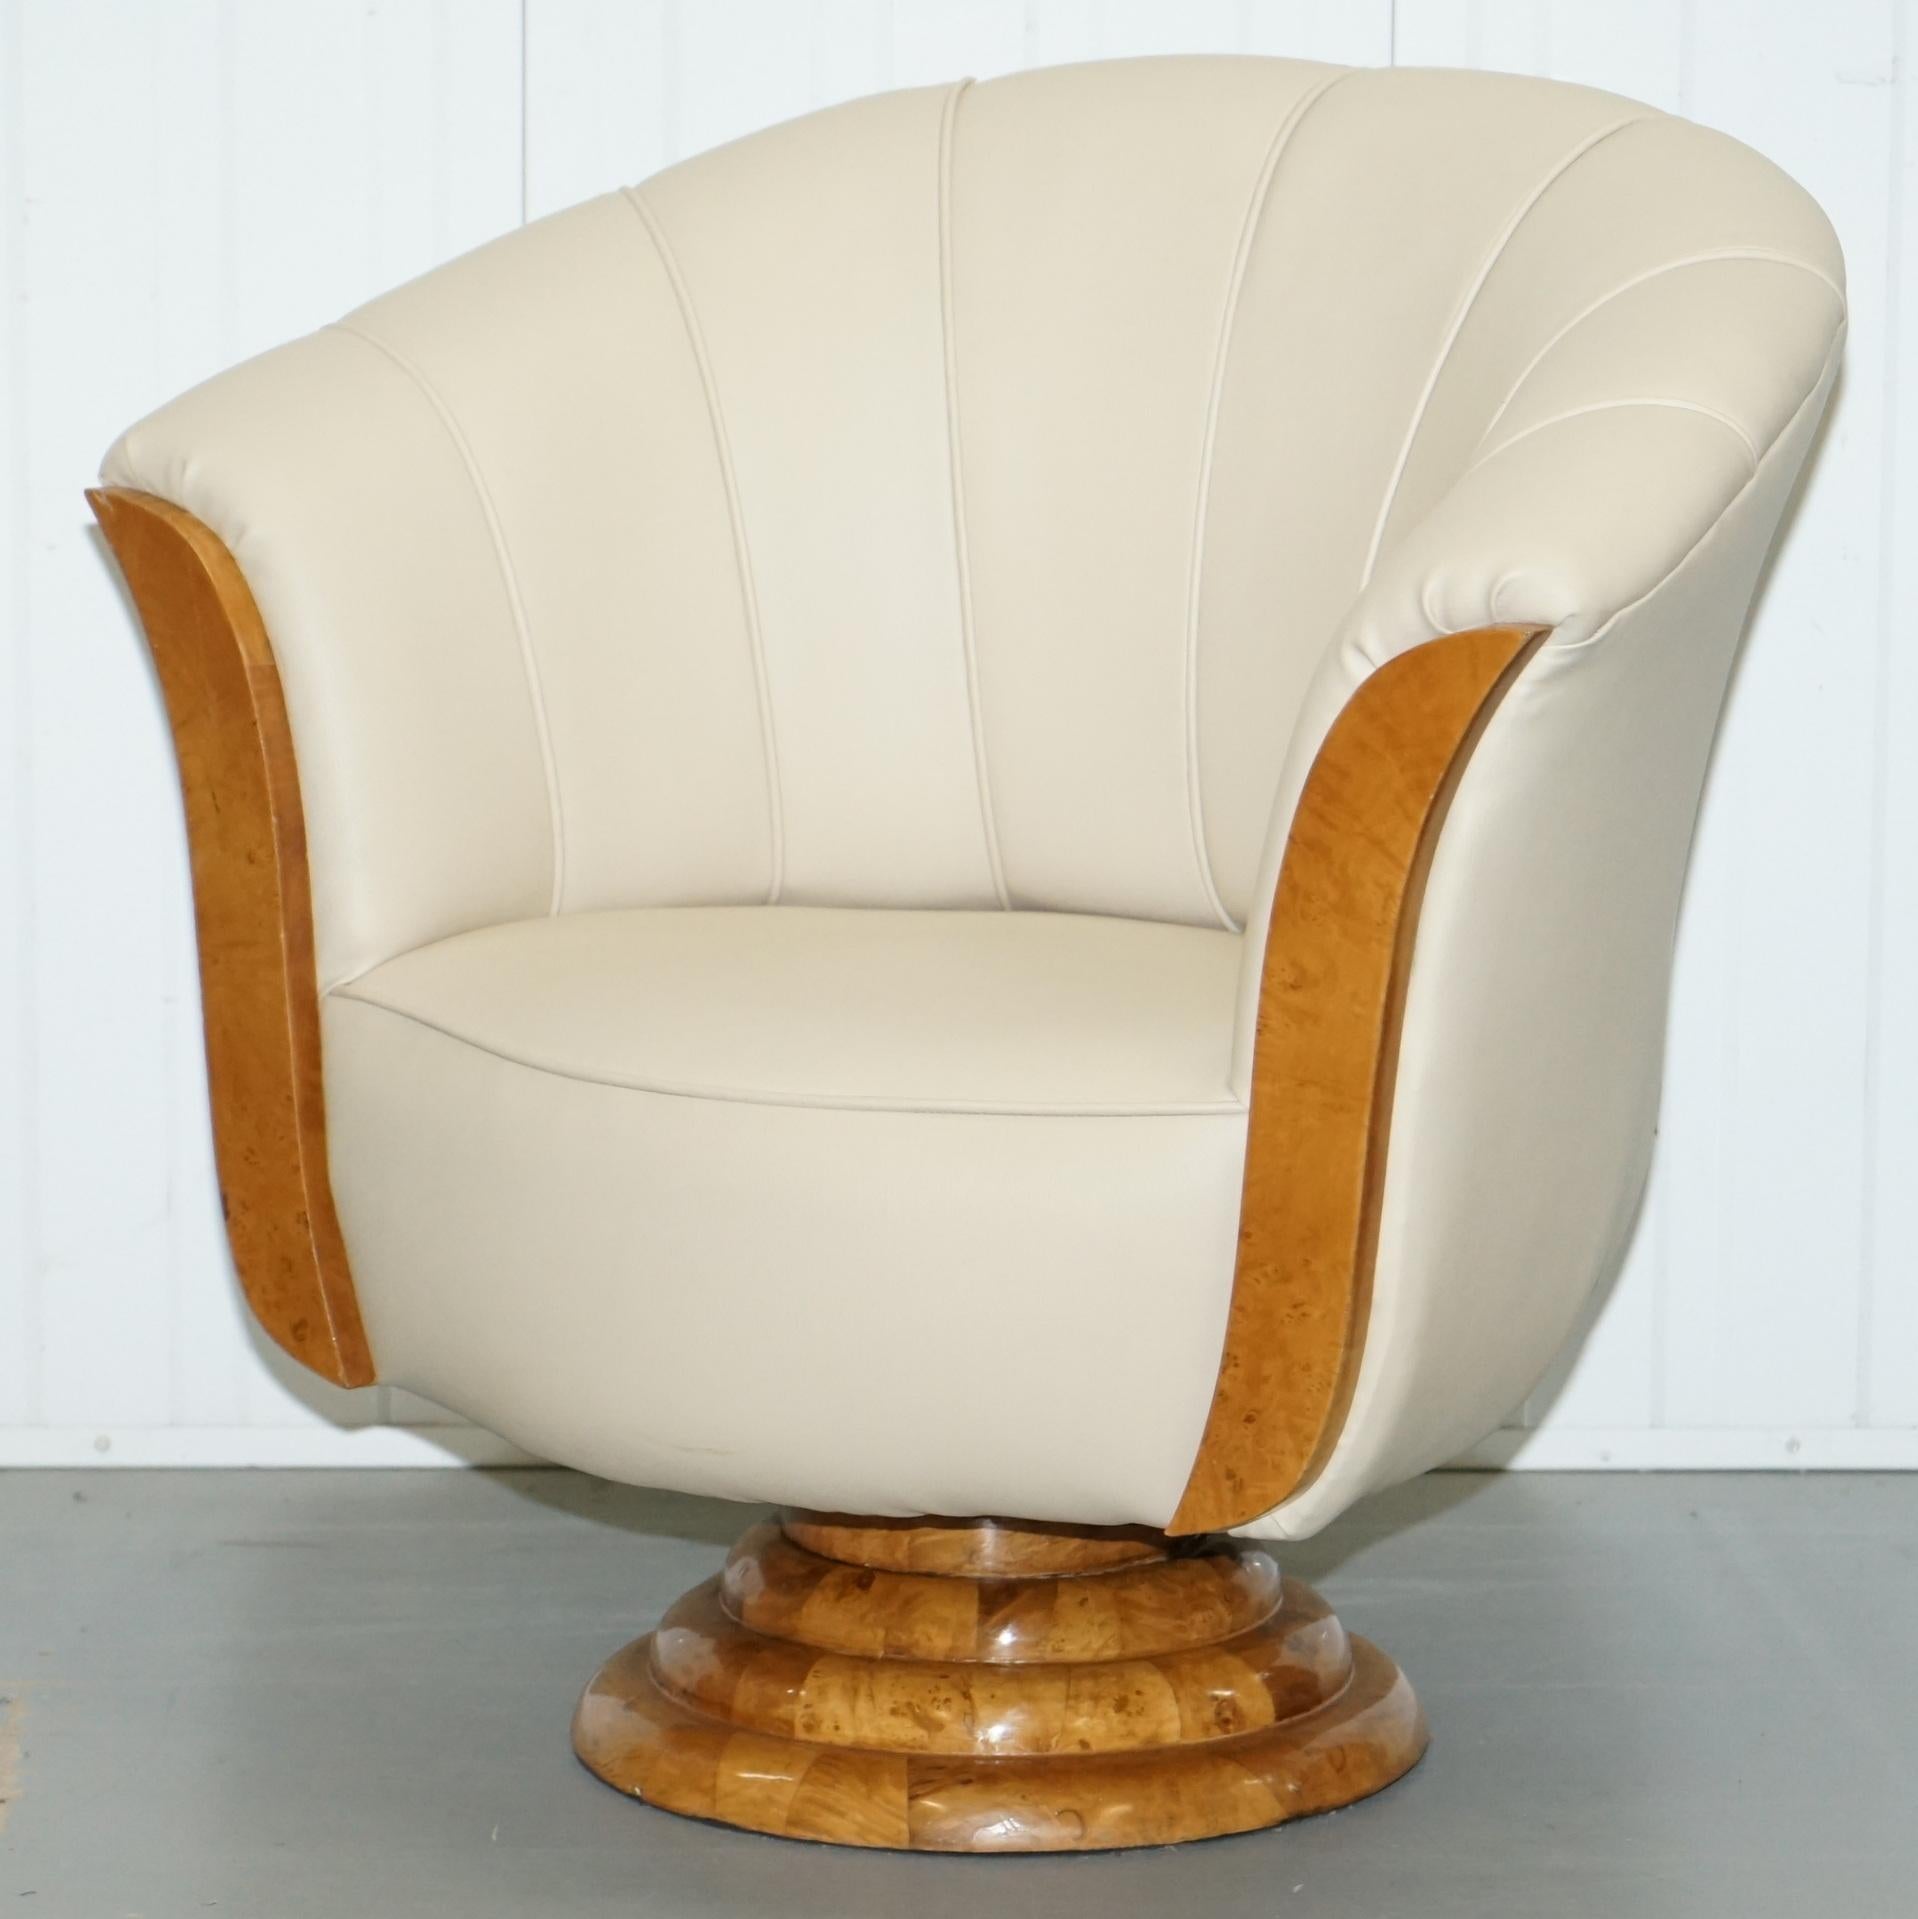 We are delighted to offer for sale this lovely pair of original Art Décor Tulip armchairs with cream leather upholstery and burr maple veneer

A very decorative and highly sort after pair in excellent vintage condition throughout, the burr walnut